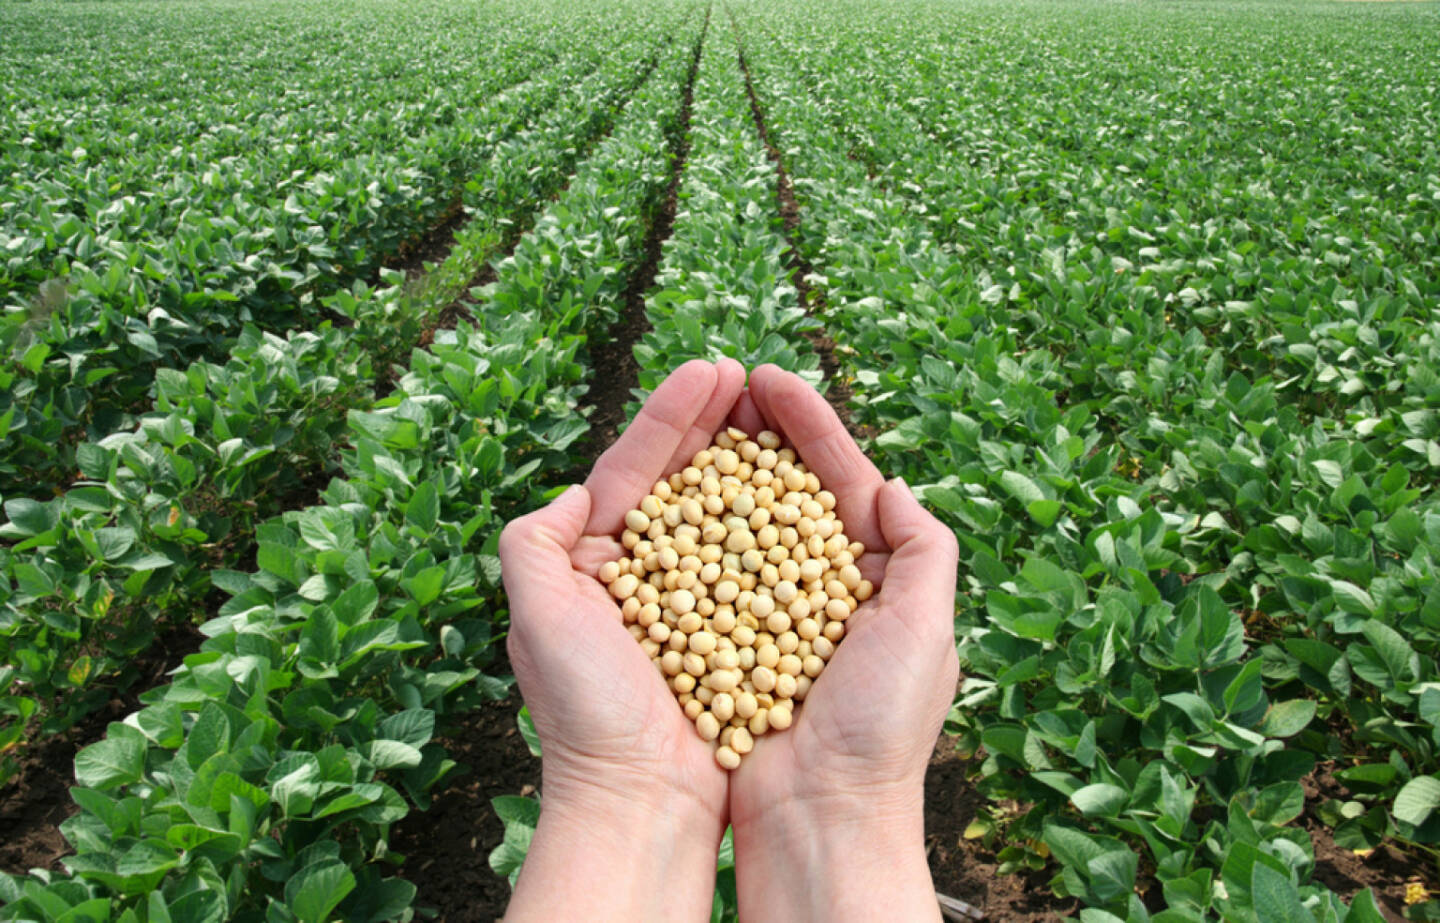 Sojabohnen, http://www.shutterstock.com/de/pic-107308046/stock-photo-human-hand-holding-soybean-with-field-in-background.html 